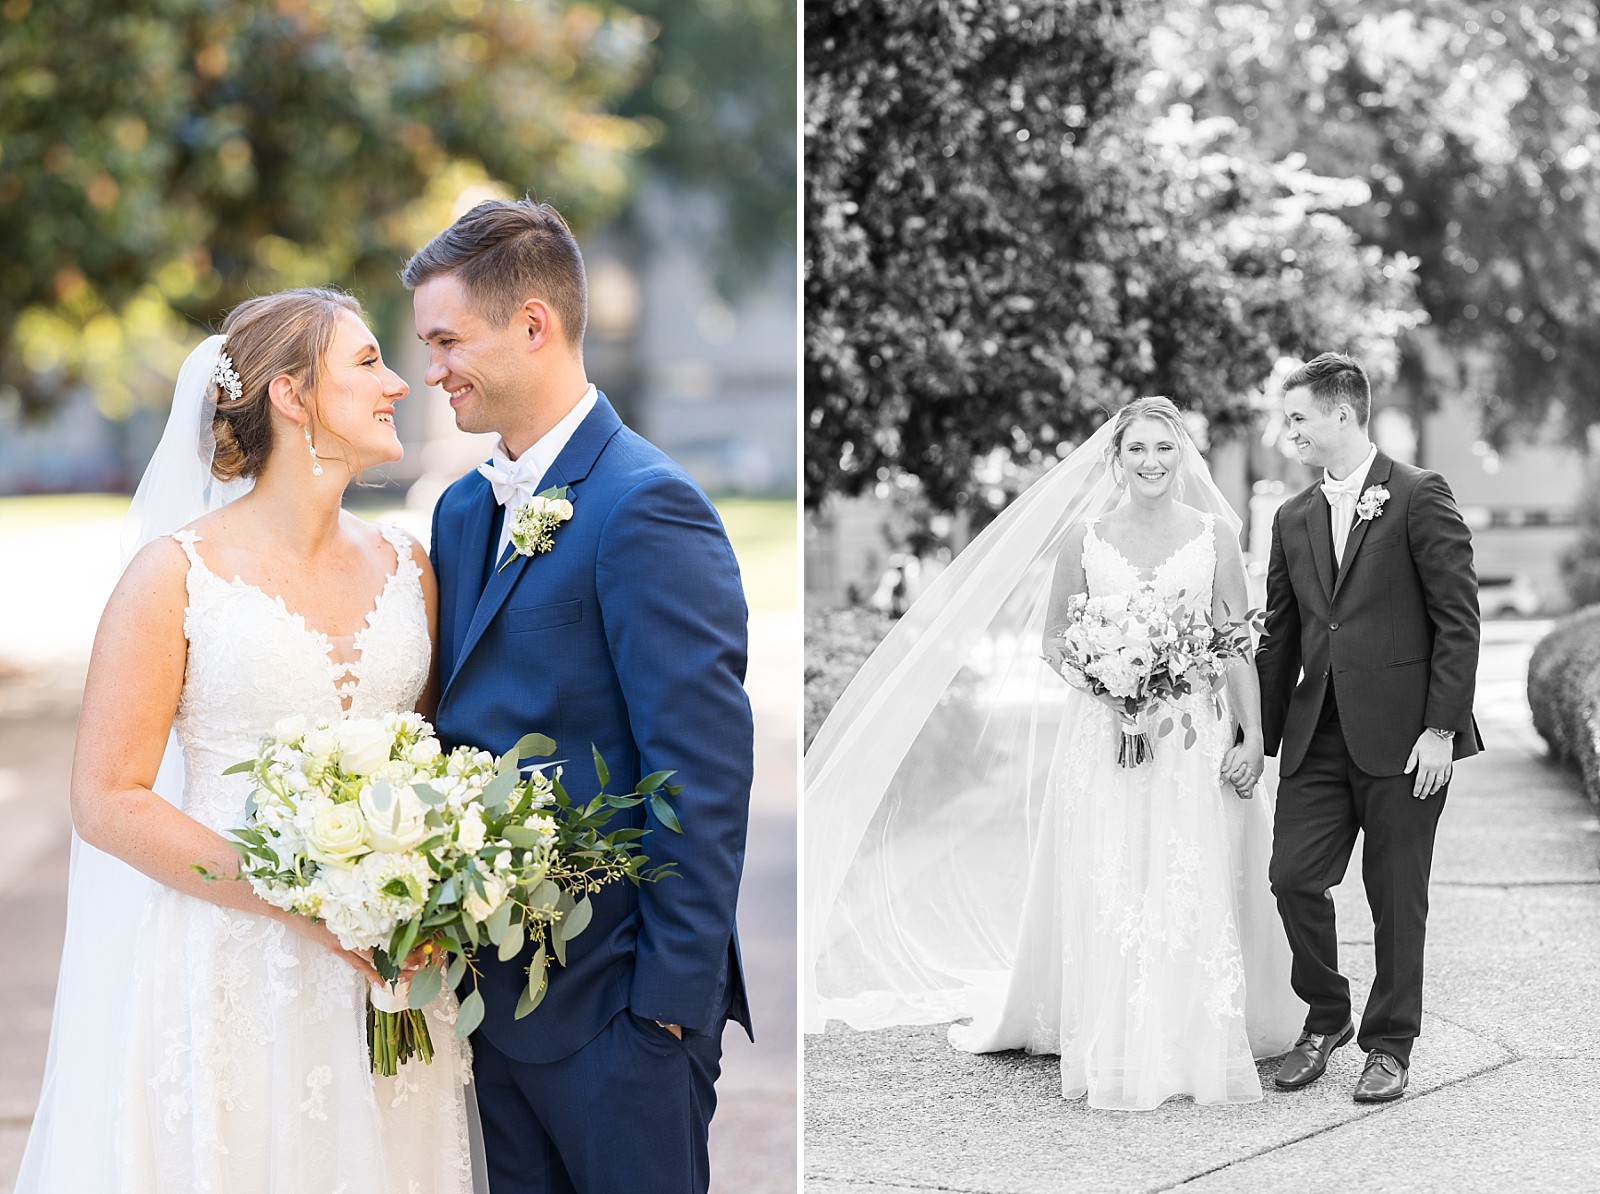 Bride and groom looking at each other | Raleigh Wedding Photographer Sarah Hinckley